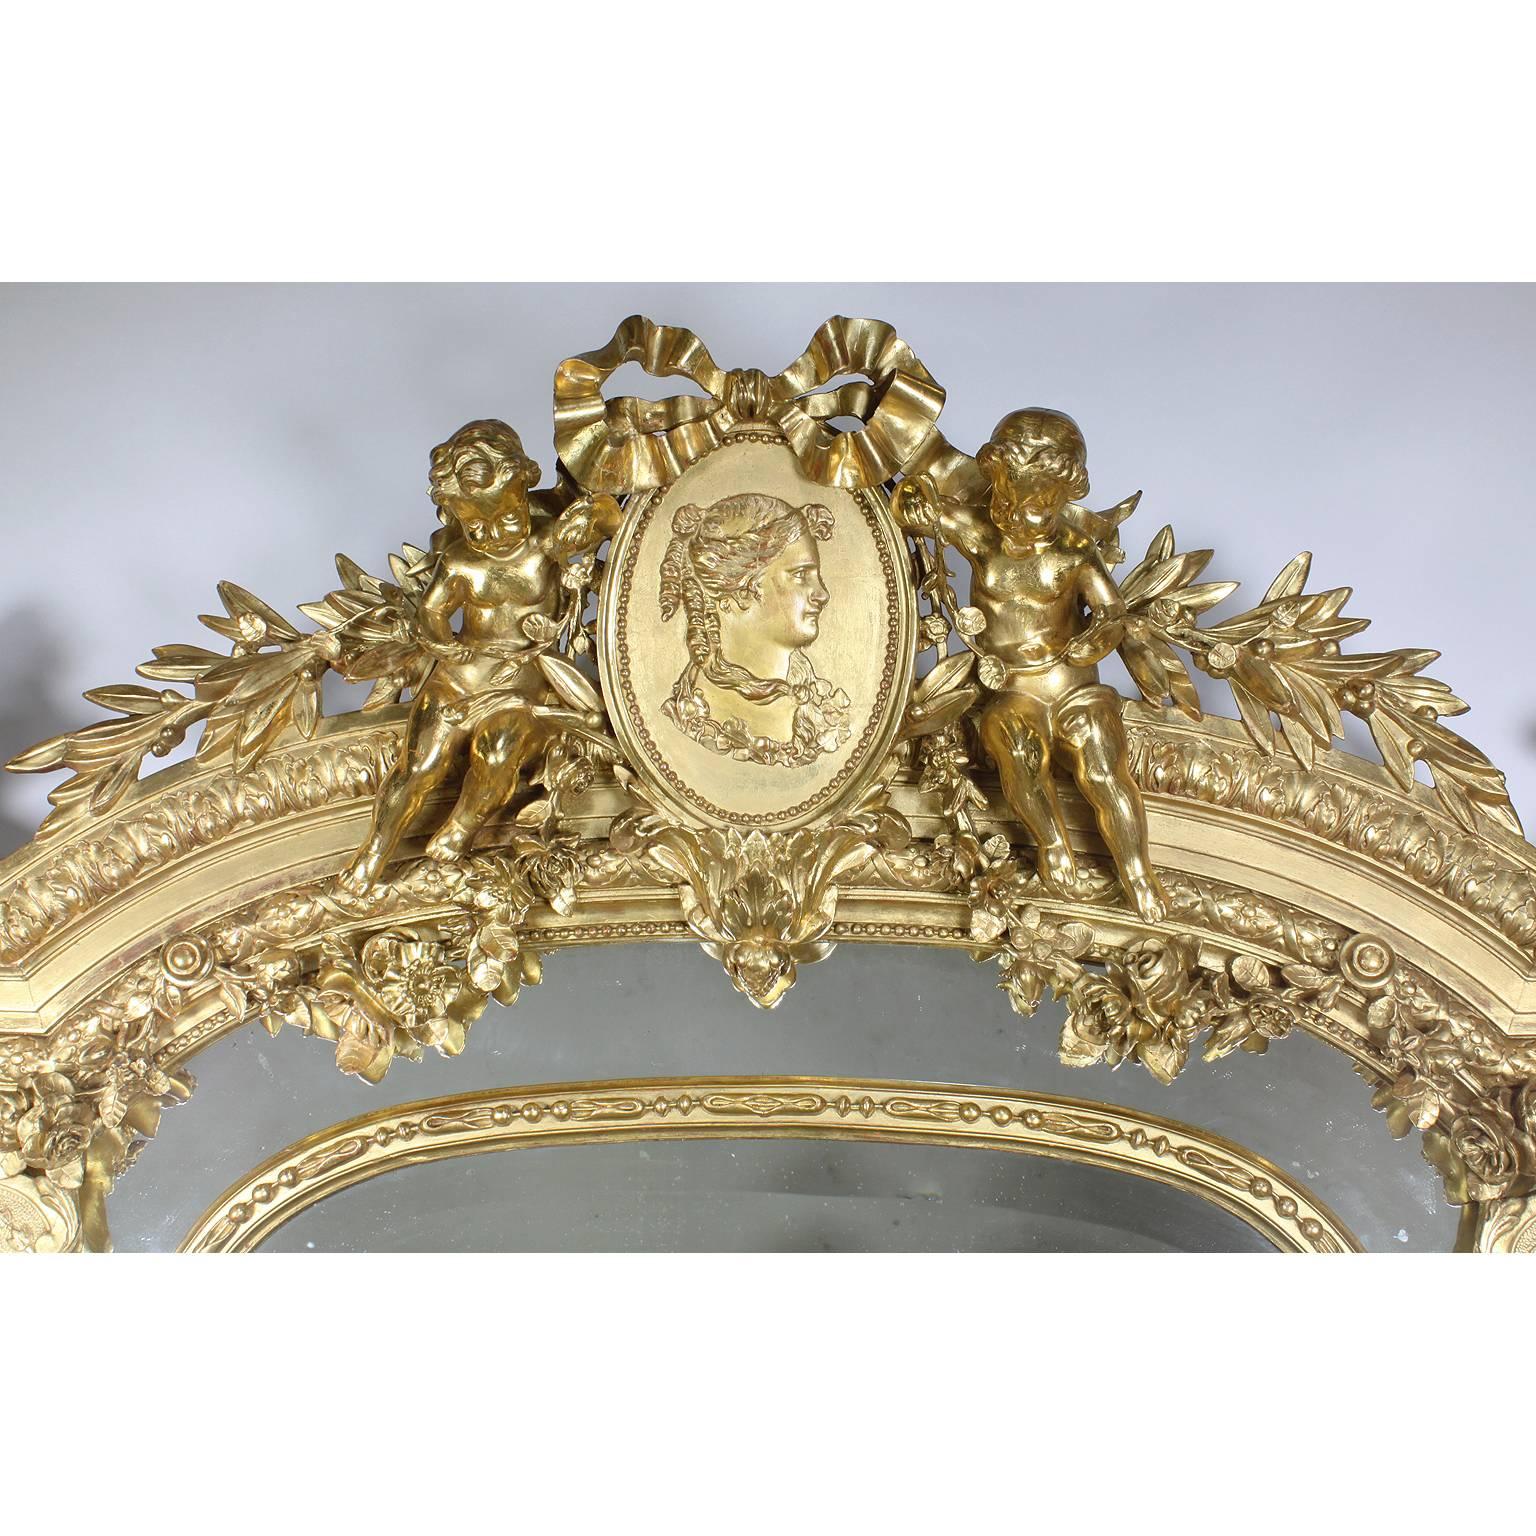 A fine and Palatial French, 19th century Louis XV style giltwood carved and Gesso figural mirror frame. The upper cresting carved with a pair of Putti holding foliate and flanking a ribbon-tied center medallion with a portrait of a Royal Maiden. The